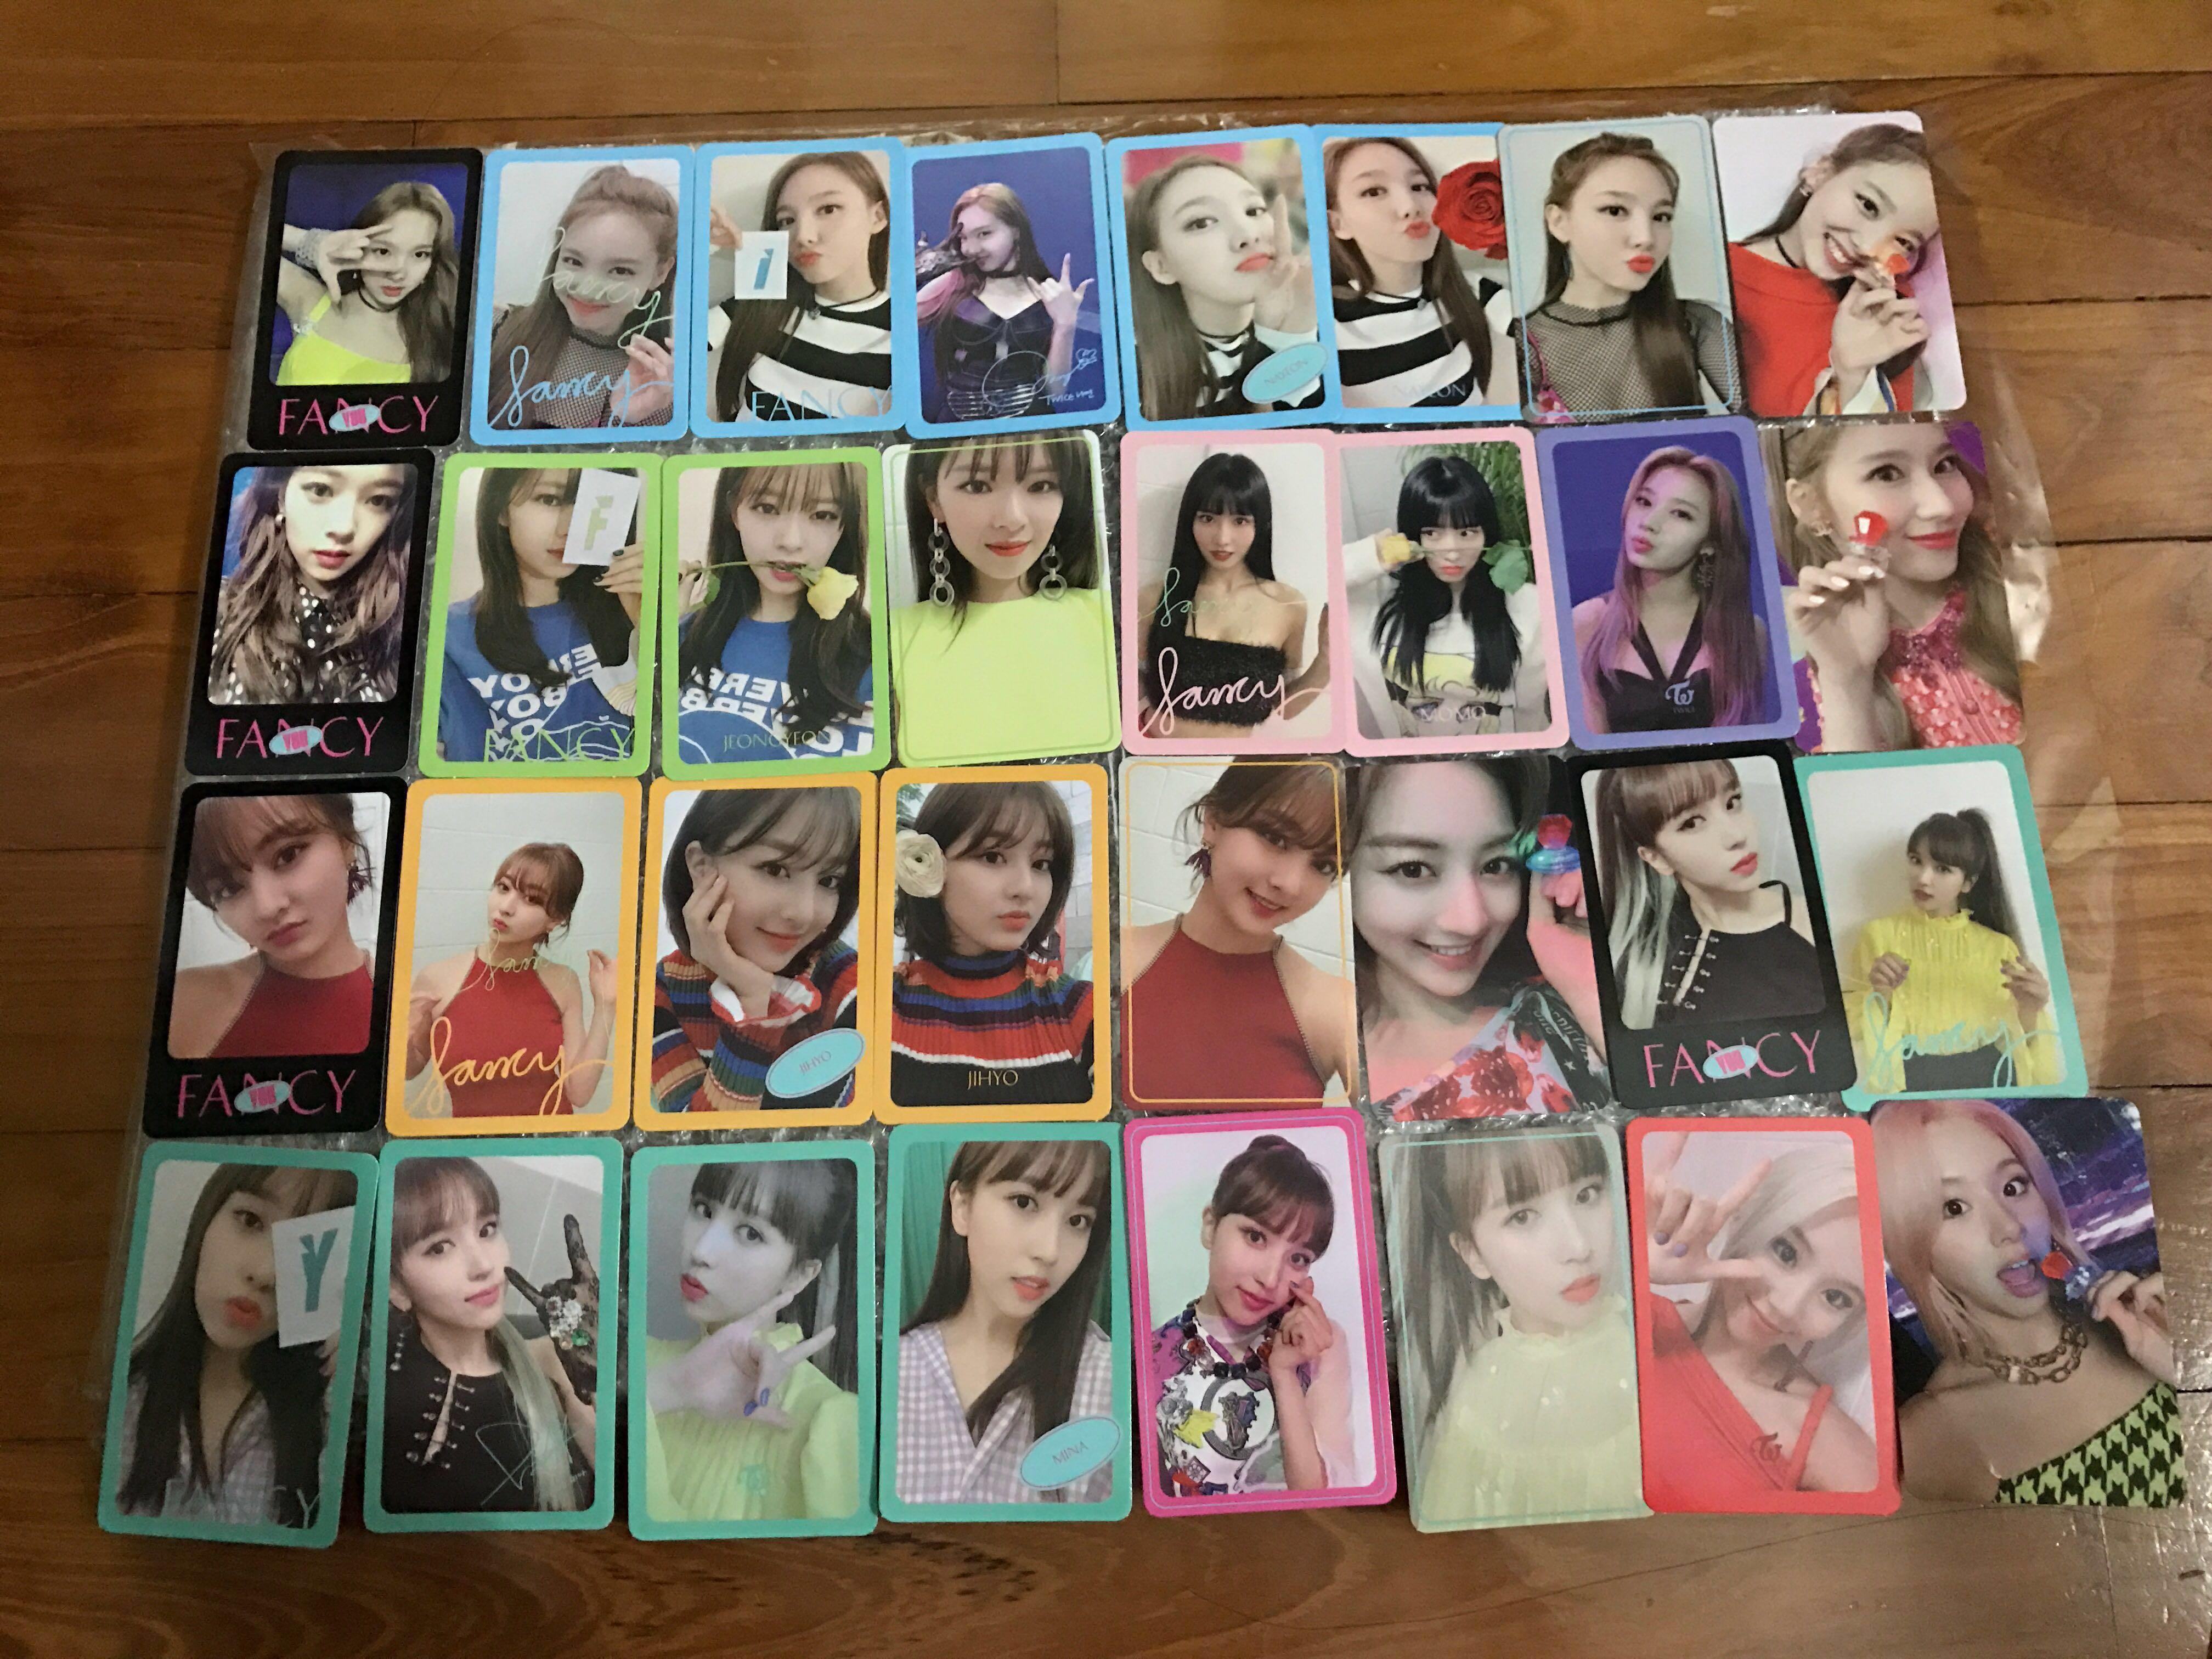 Pls Refer To New Listing Wtt Wts Twice Fancy Photocards Hobbies Toys Memorabilia Collectibles K Wave On Carousell